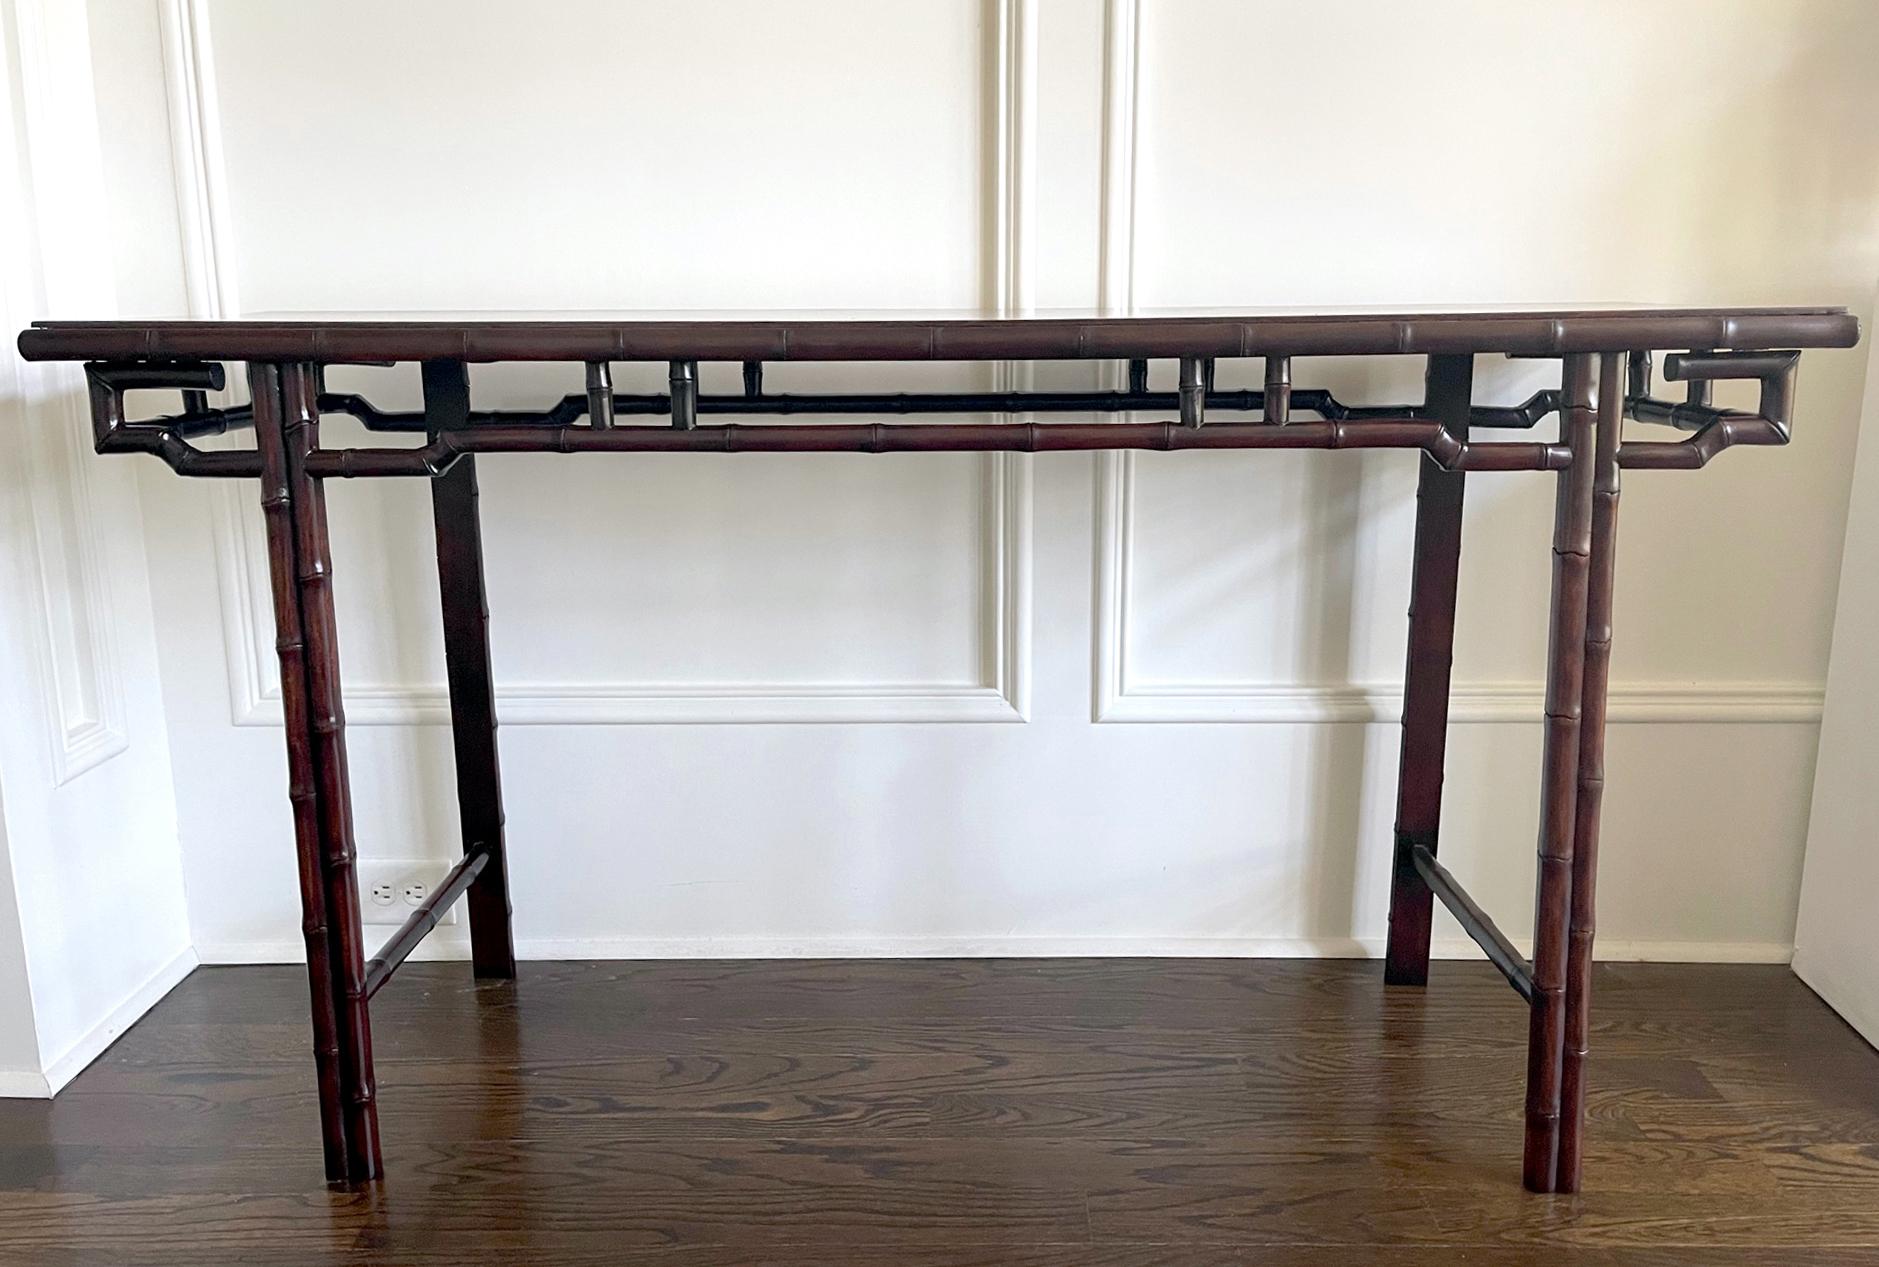 A Chinese wood altar table or console table circa late 19th to early 20th century (late Qing dynasty to the Republic era). The table was constructed with mixed wood types. The legs and fret-apron surround are of a reddish Mohagany type wood